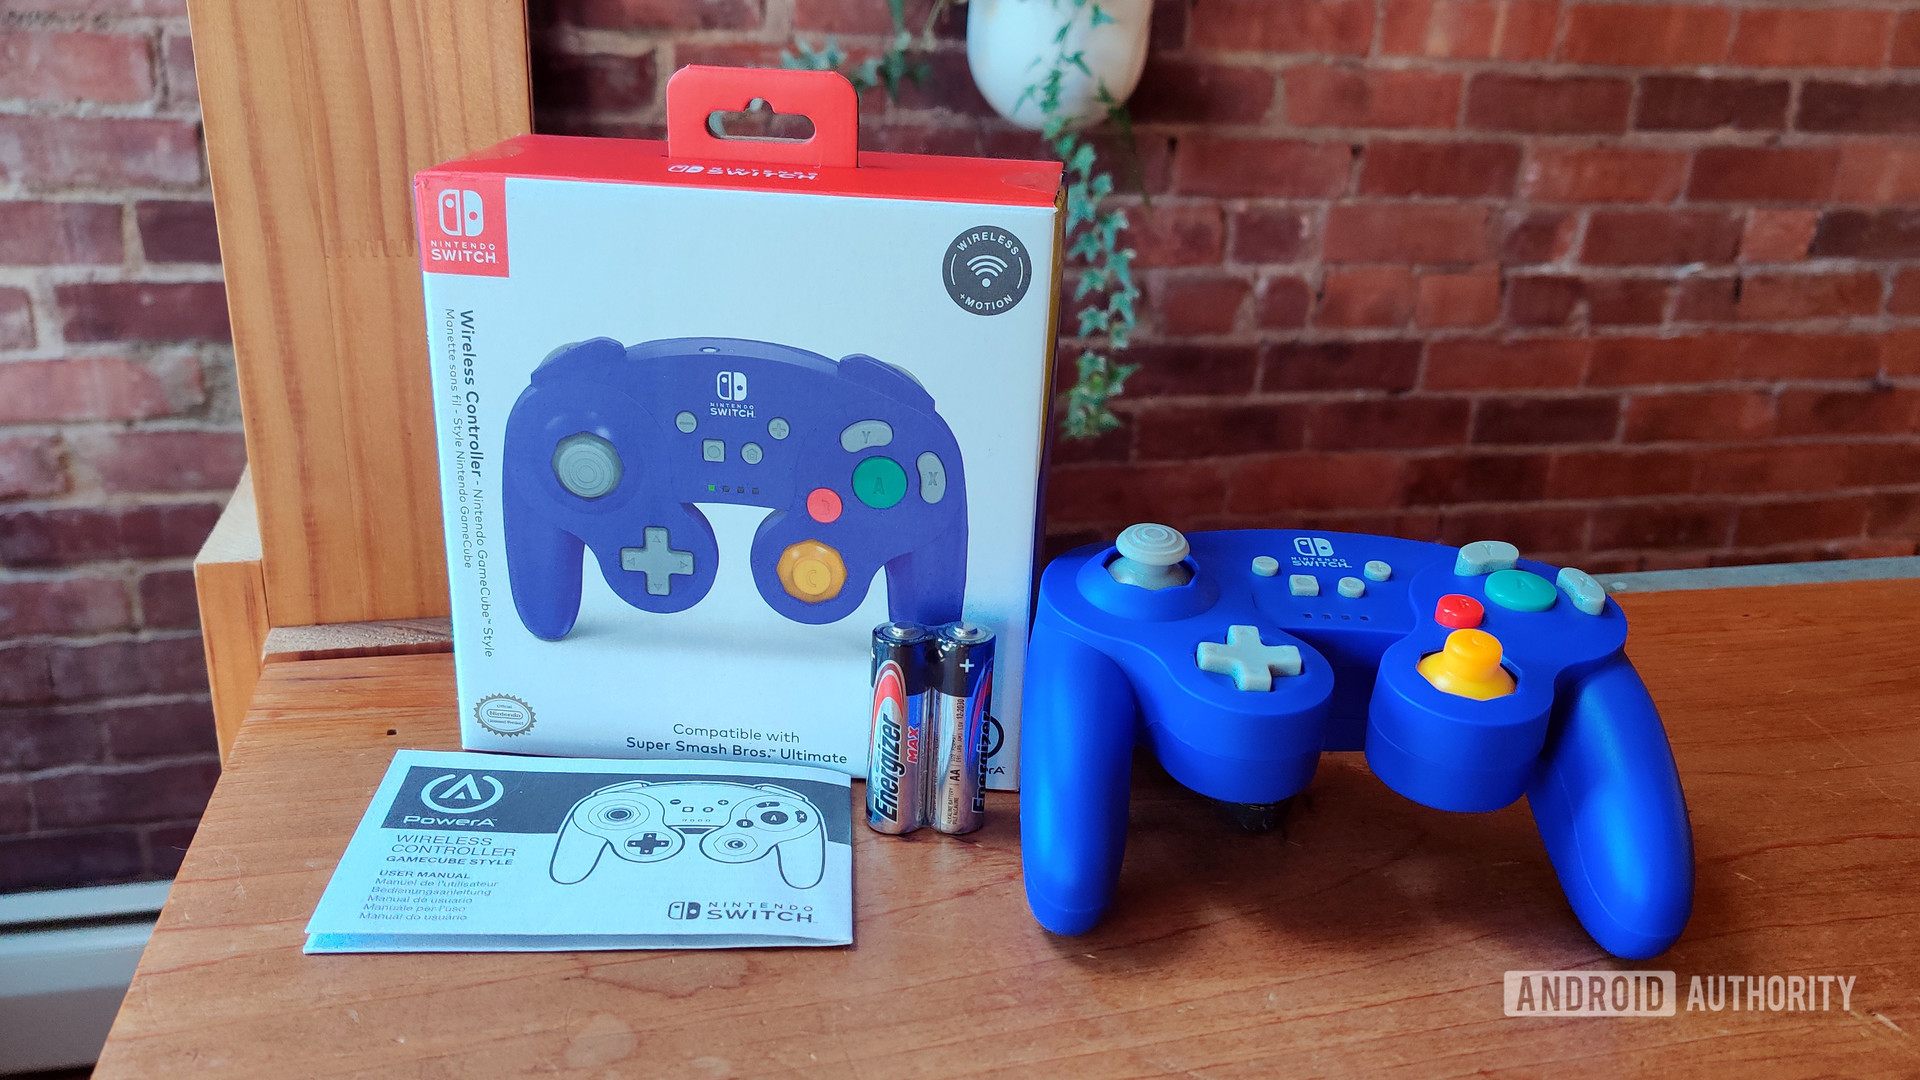 PowerA GameCube Wireless Controller for Nintendo Switch Review Box Contents